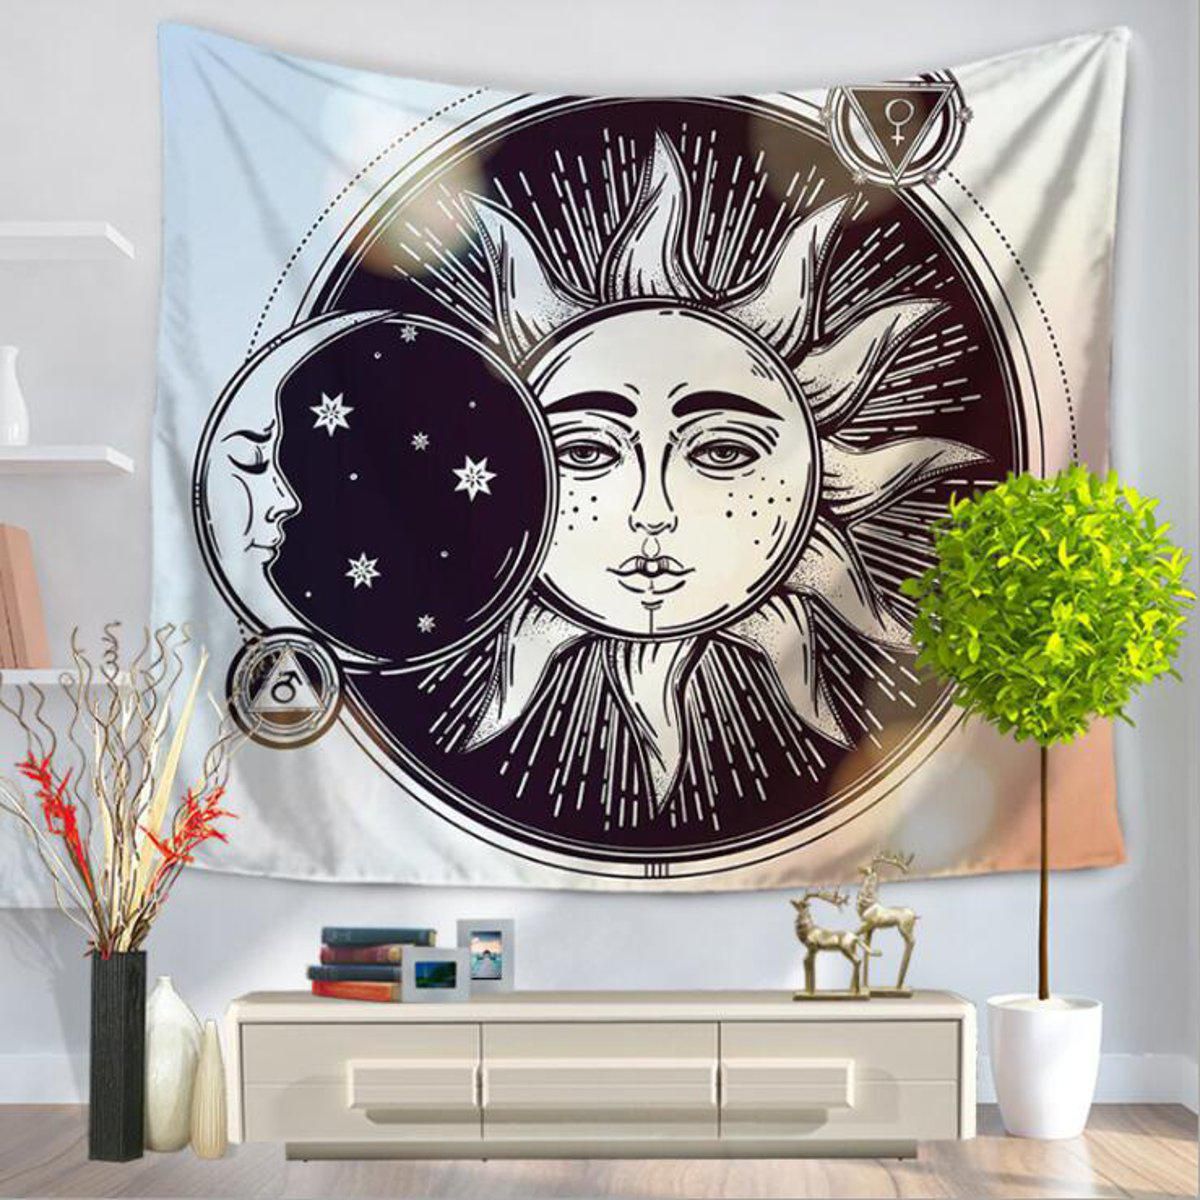 Indian Hippie Psychedelic Sun Moon Mandala Tapestry Art Wall Hanging Bedspread Buy Indian Hippie Psychedelic Sun Moon Mandala Tapestry Art Wall Hanging Bedspread At Best Price In India On Snapdeal